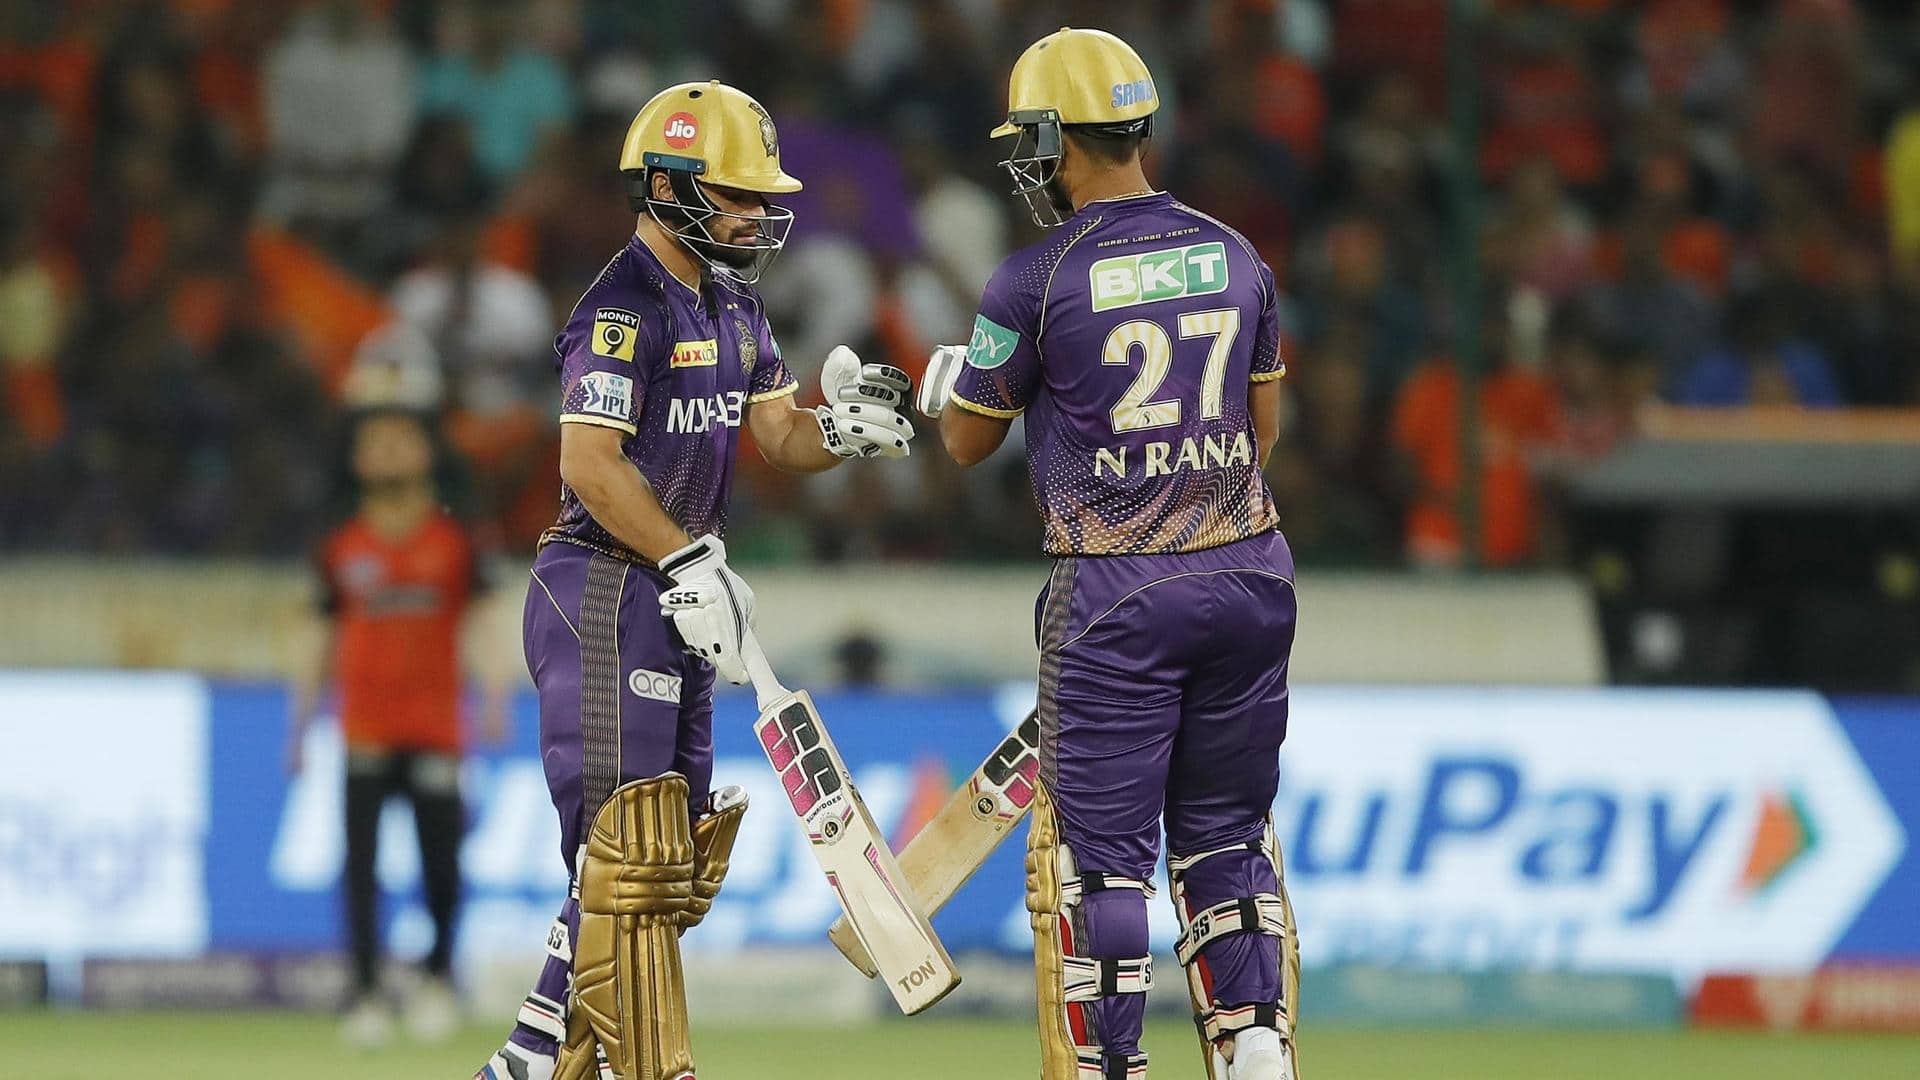 Nitish Rana becomes fourth KKR player with 2,000-plus runs: Stats